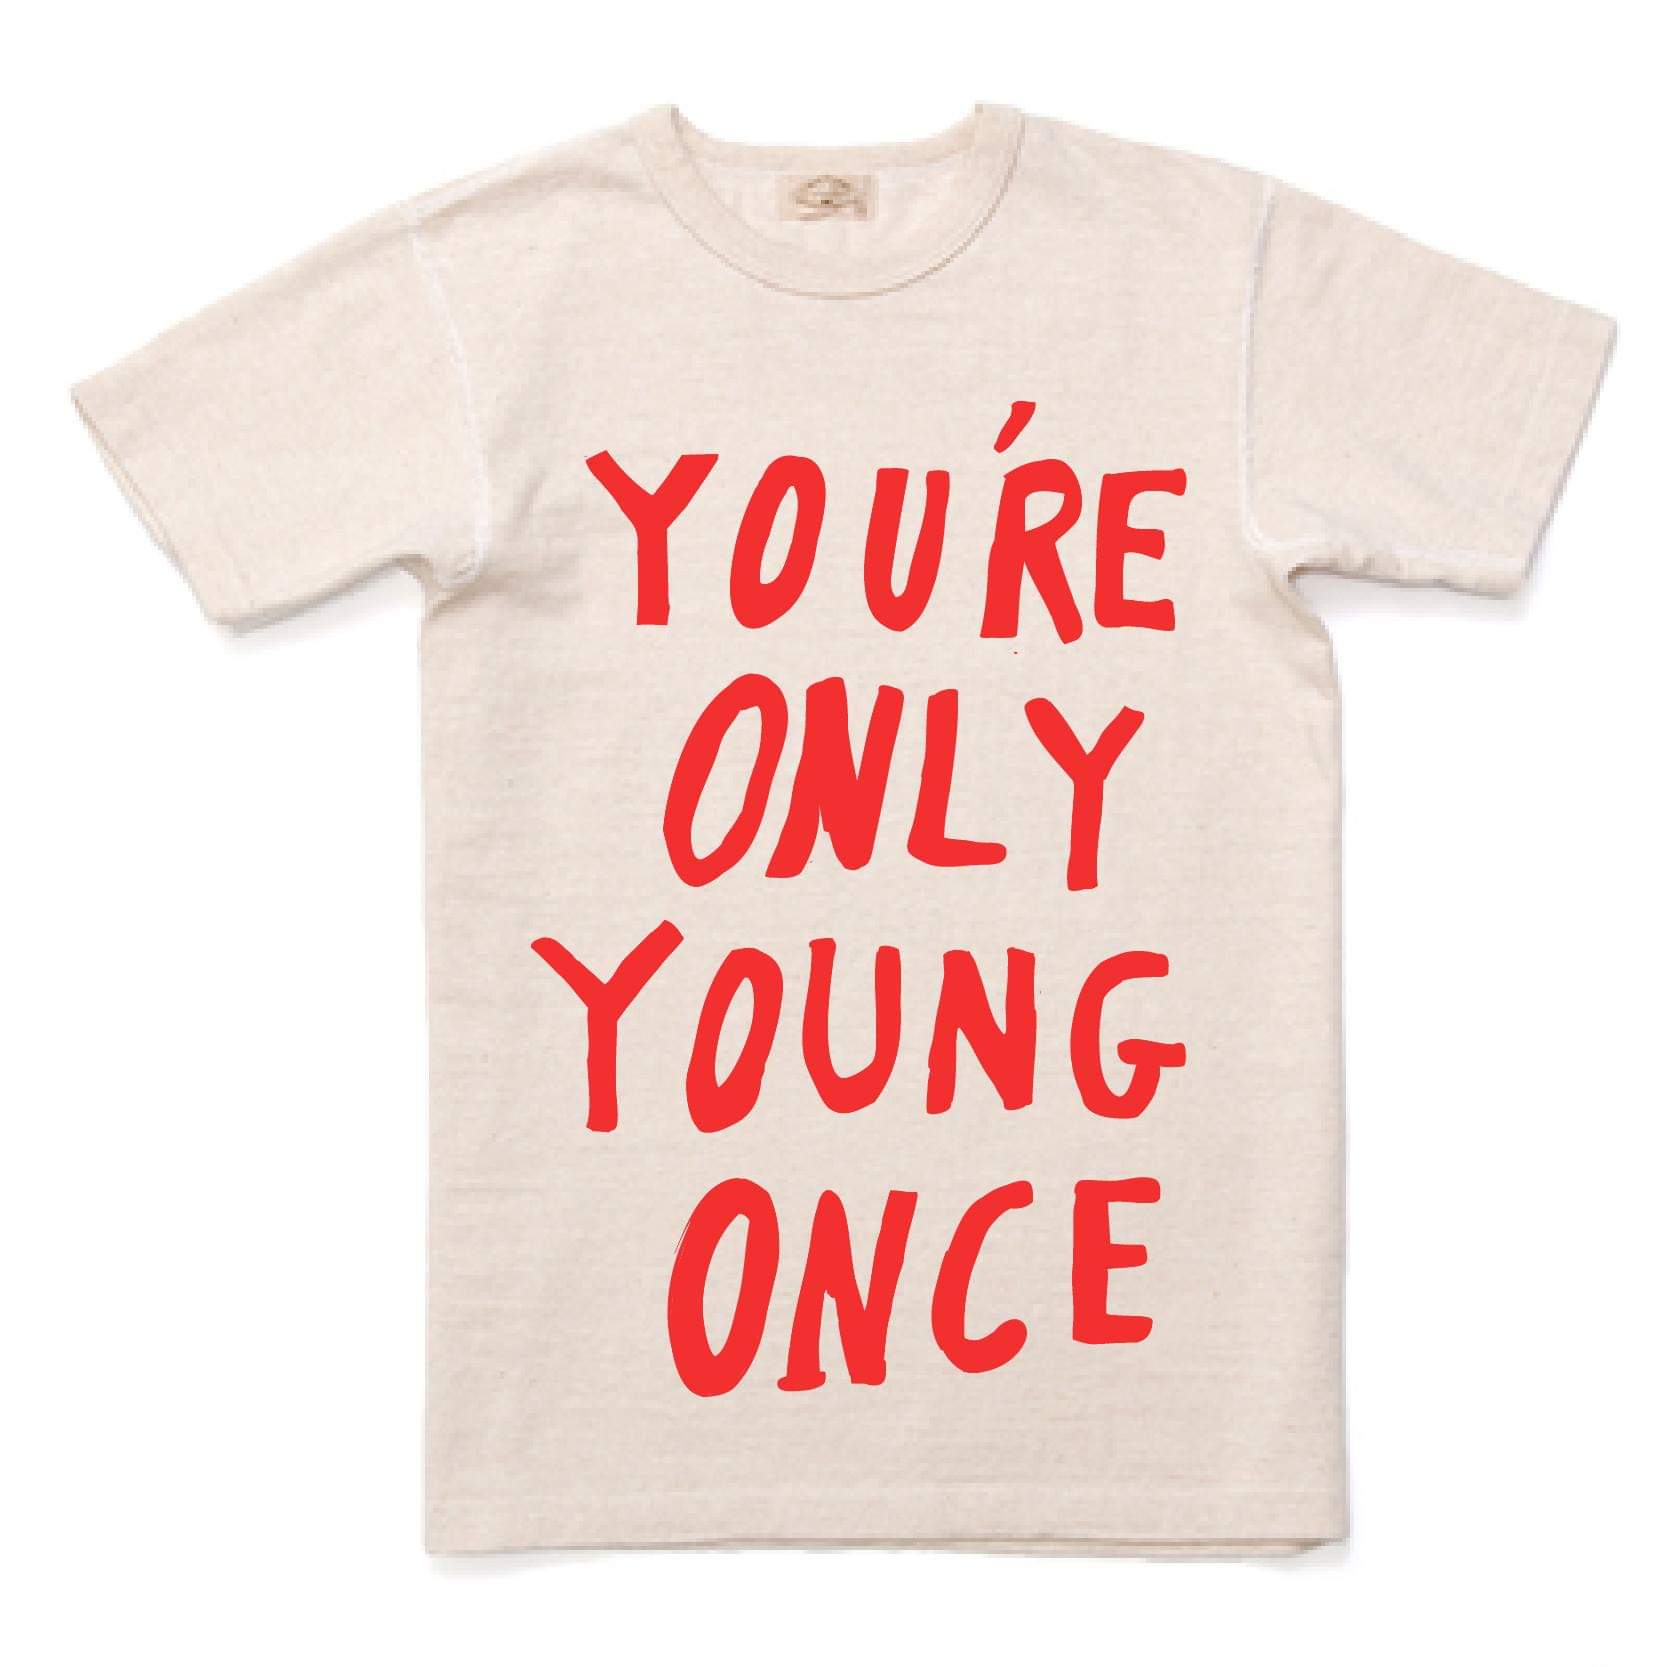 You're only young once TSHIRT